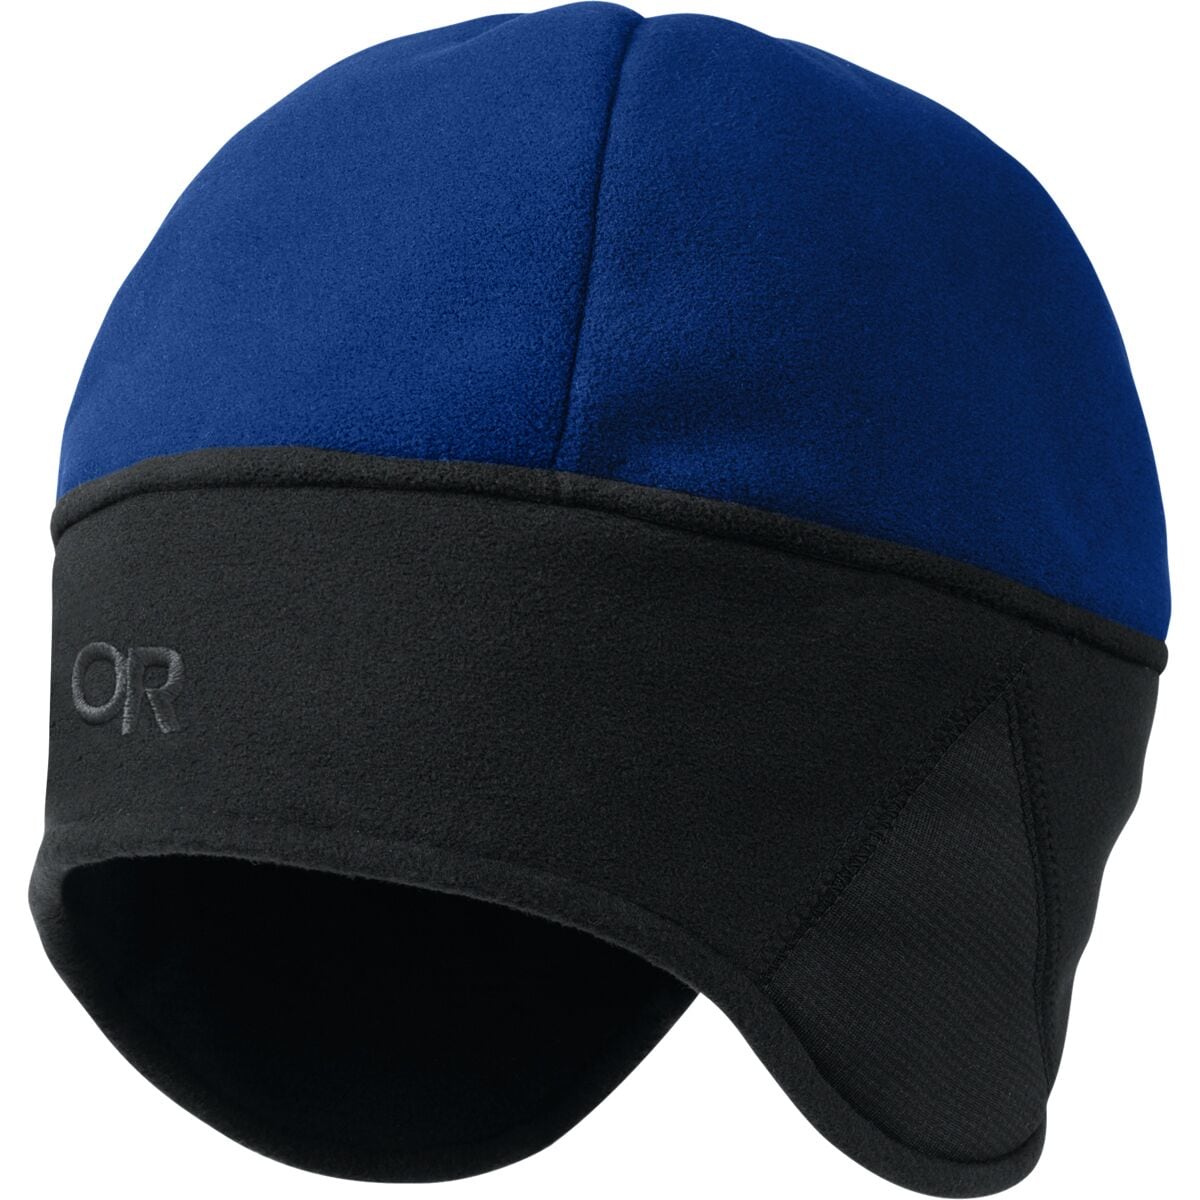 Outdoor Research Wind Warrior Hat - Classic Blue - S/M